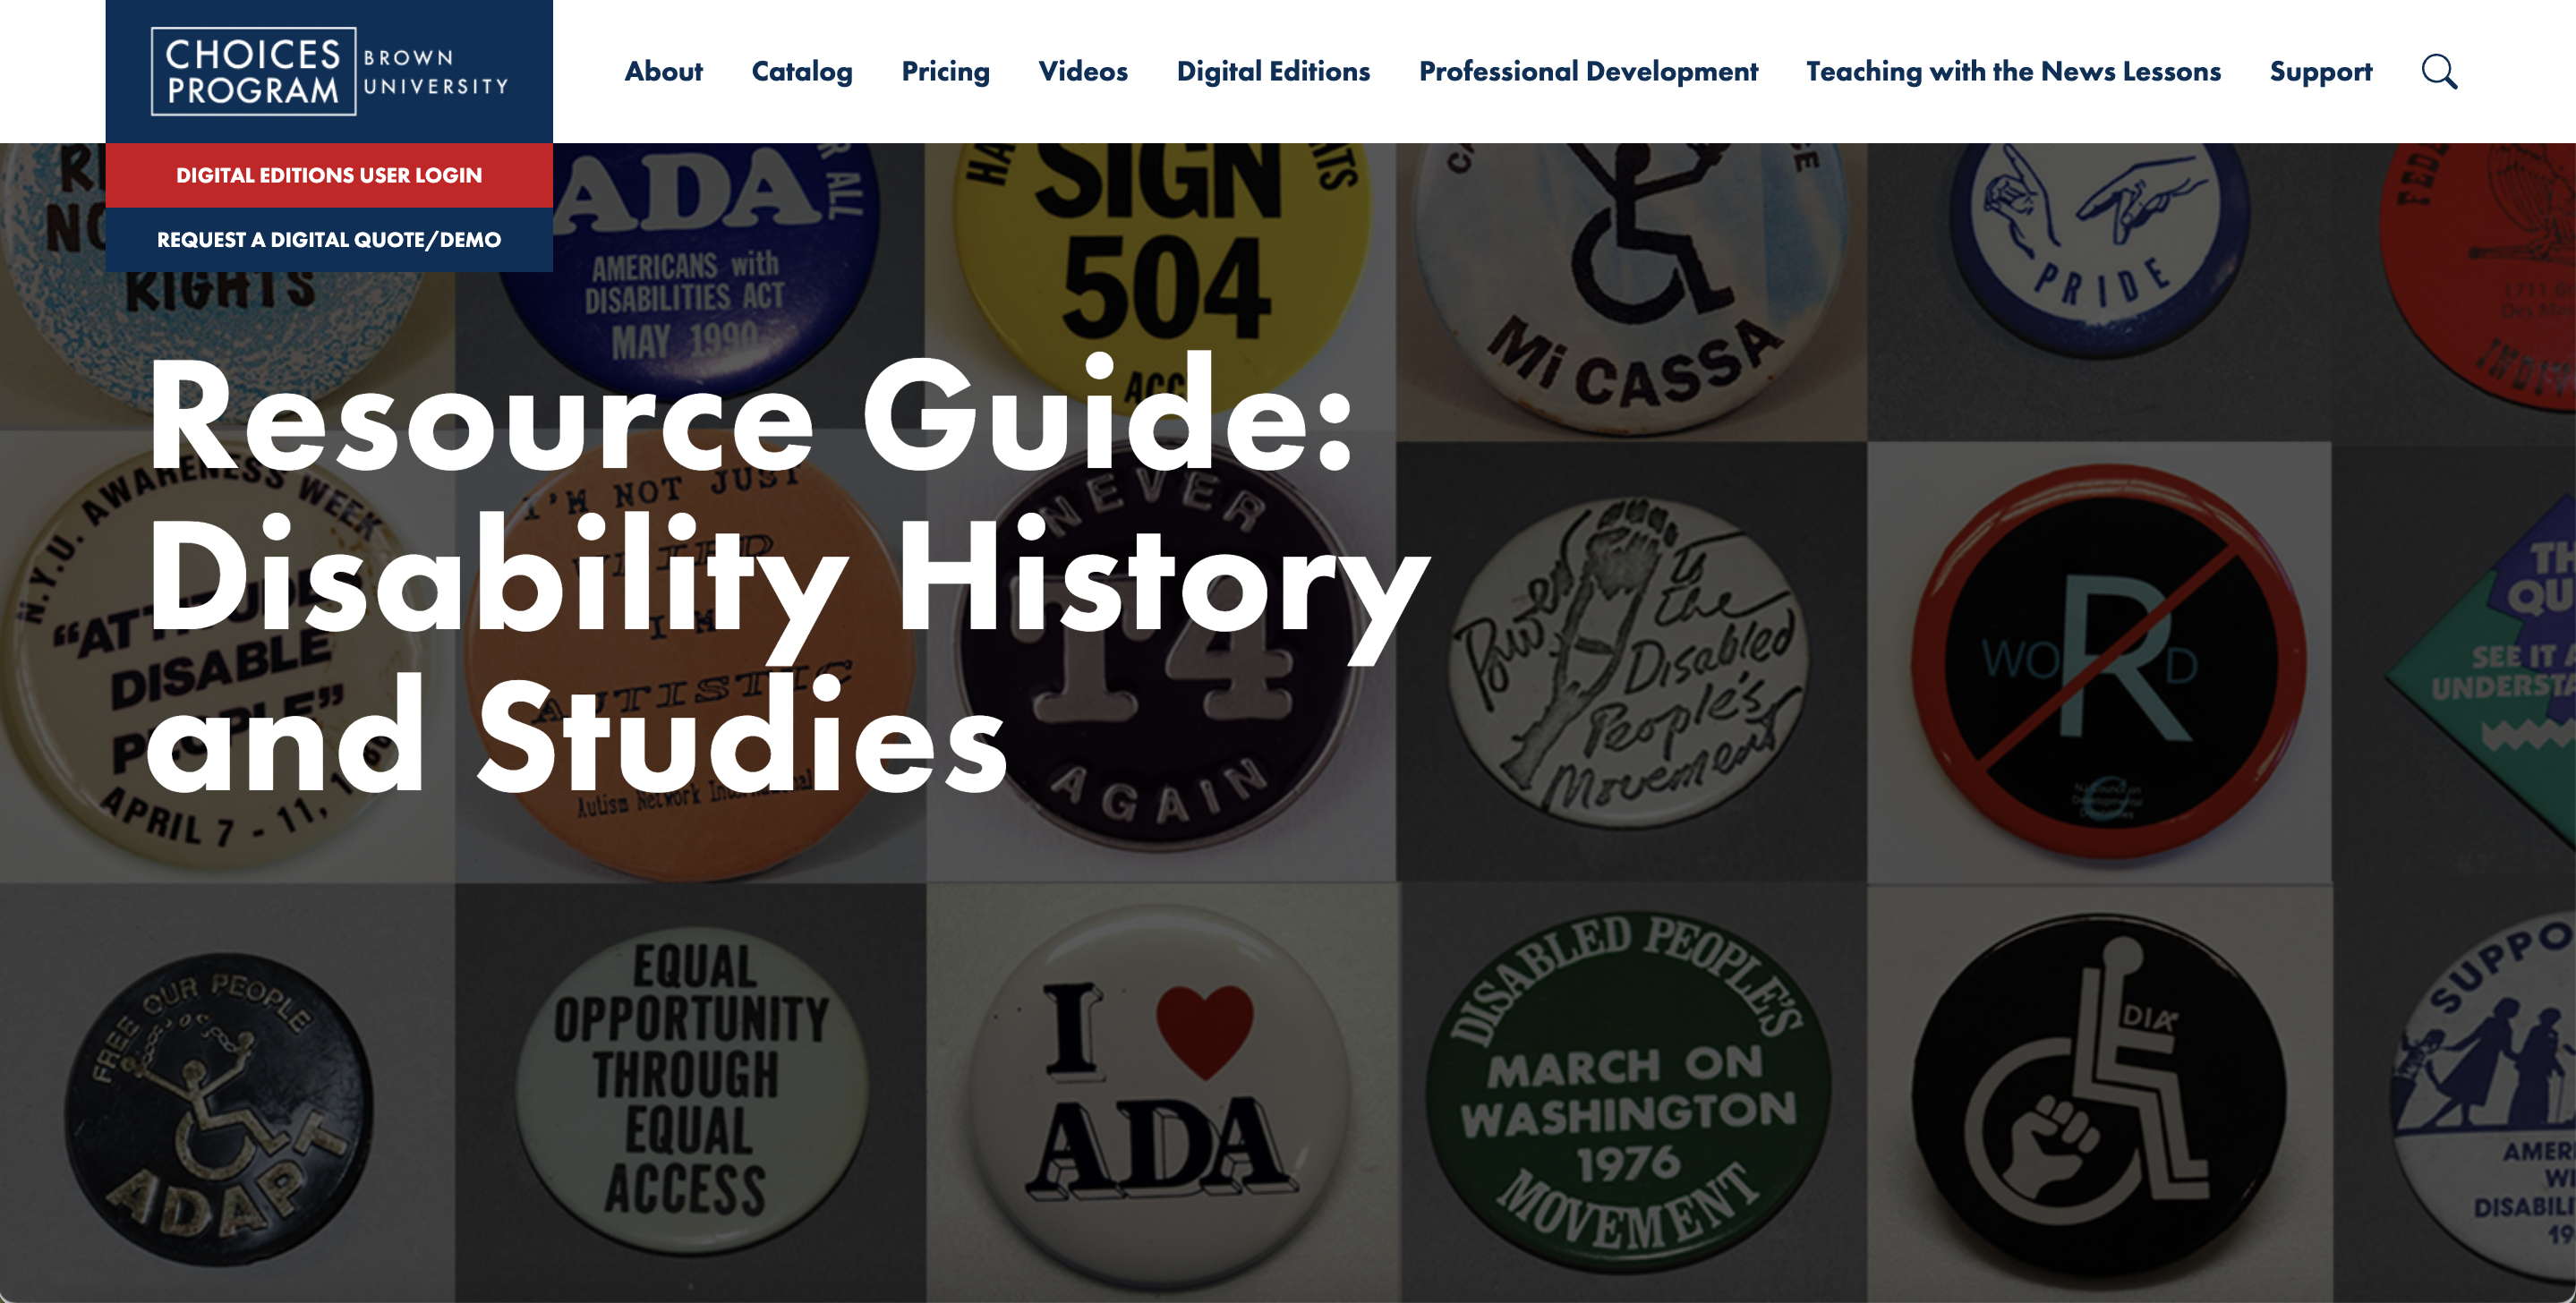 Logo of the Brown University Choices program - Resource Guide: Disability History and Studies 